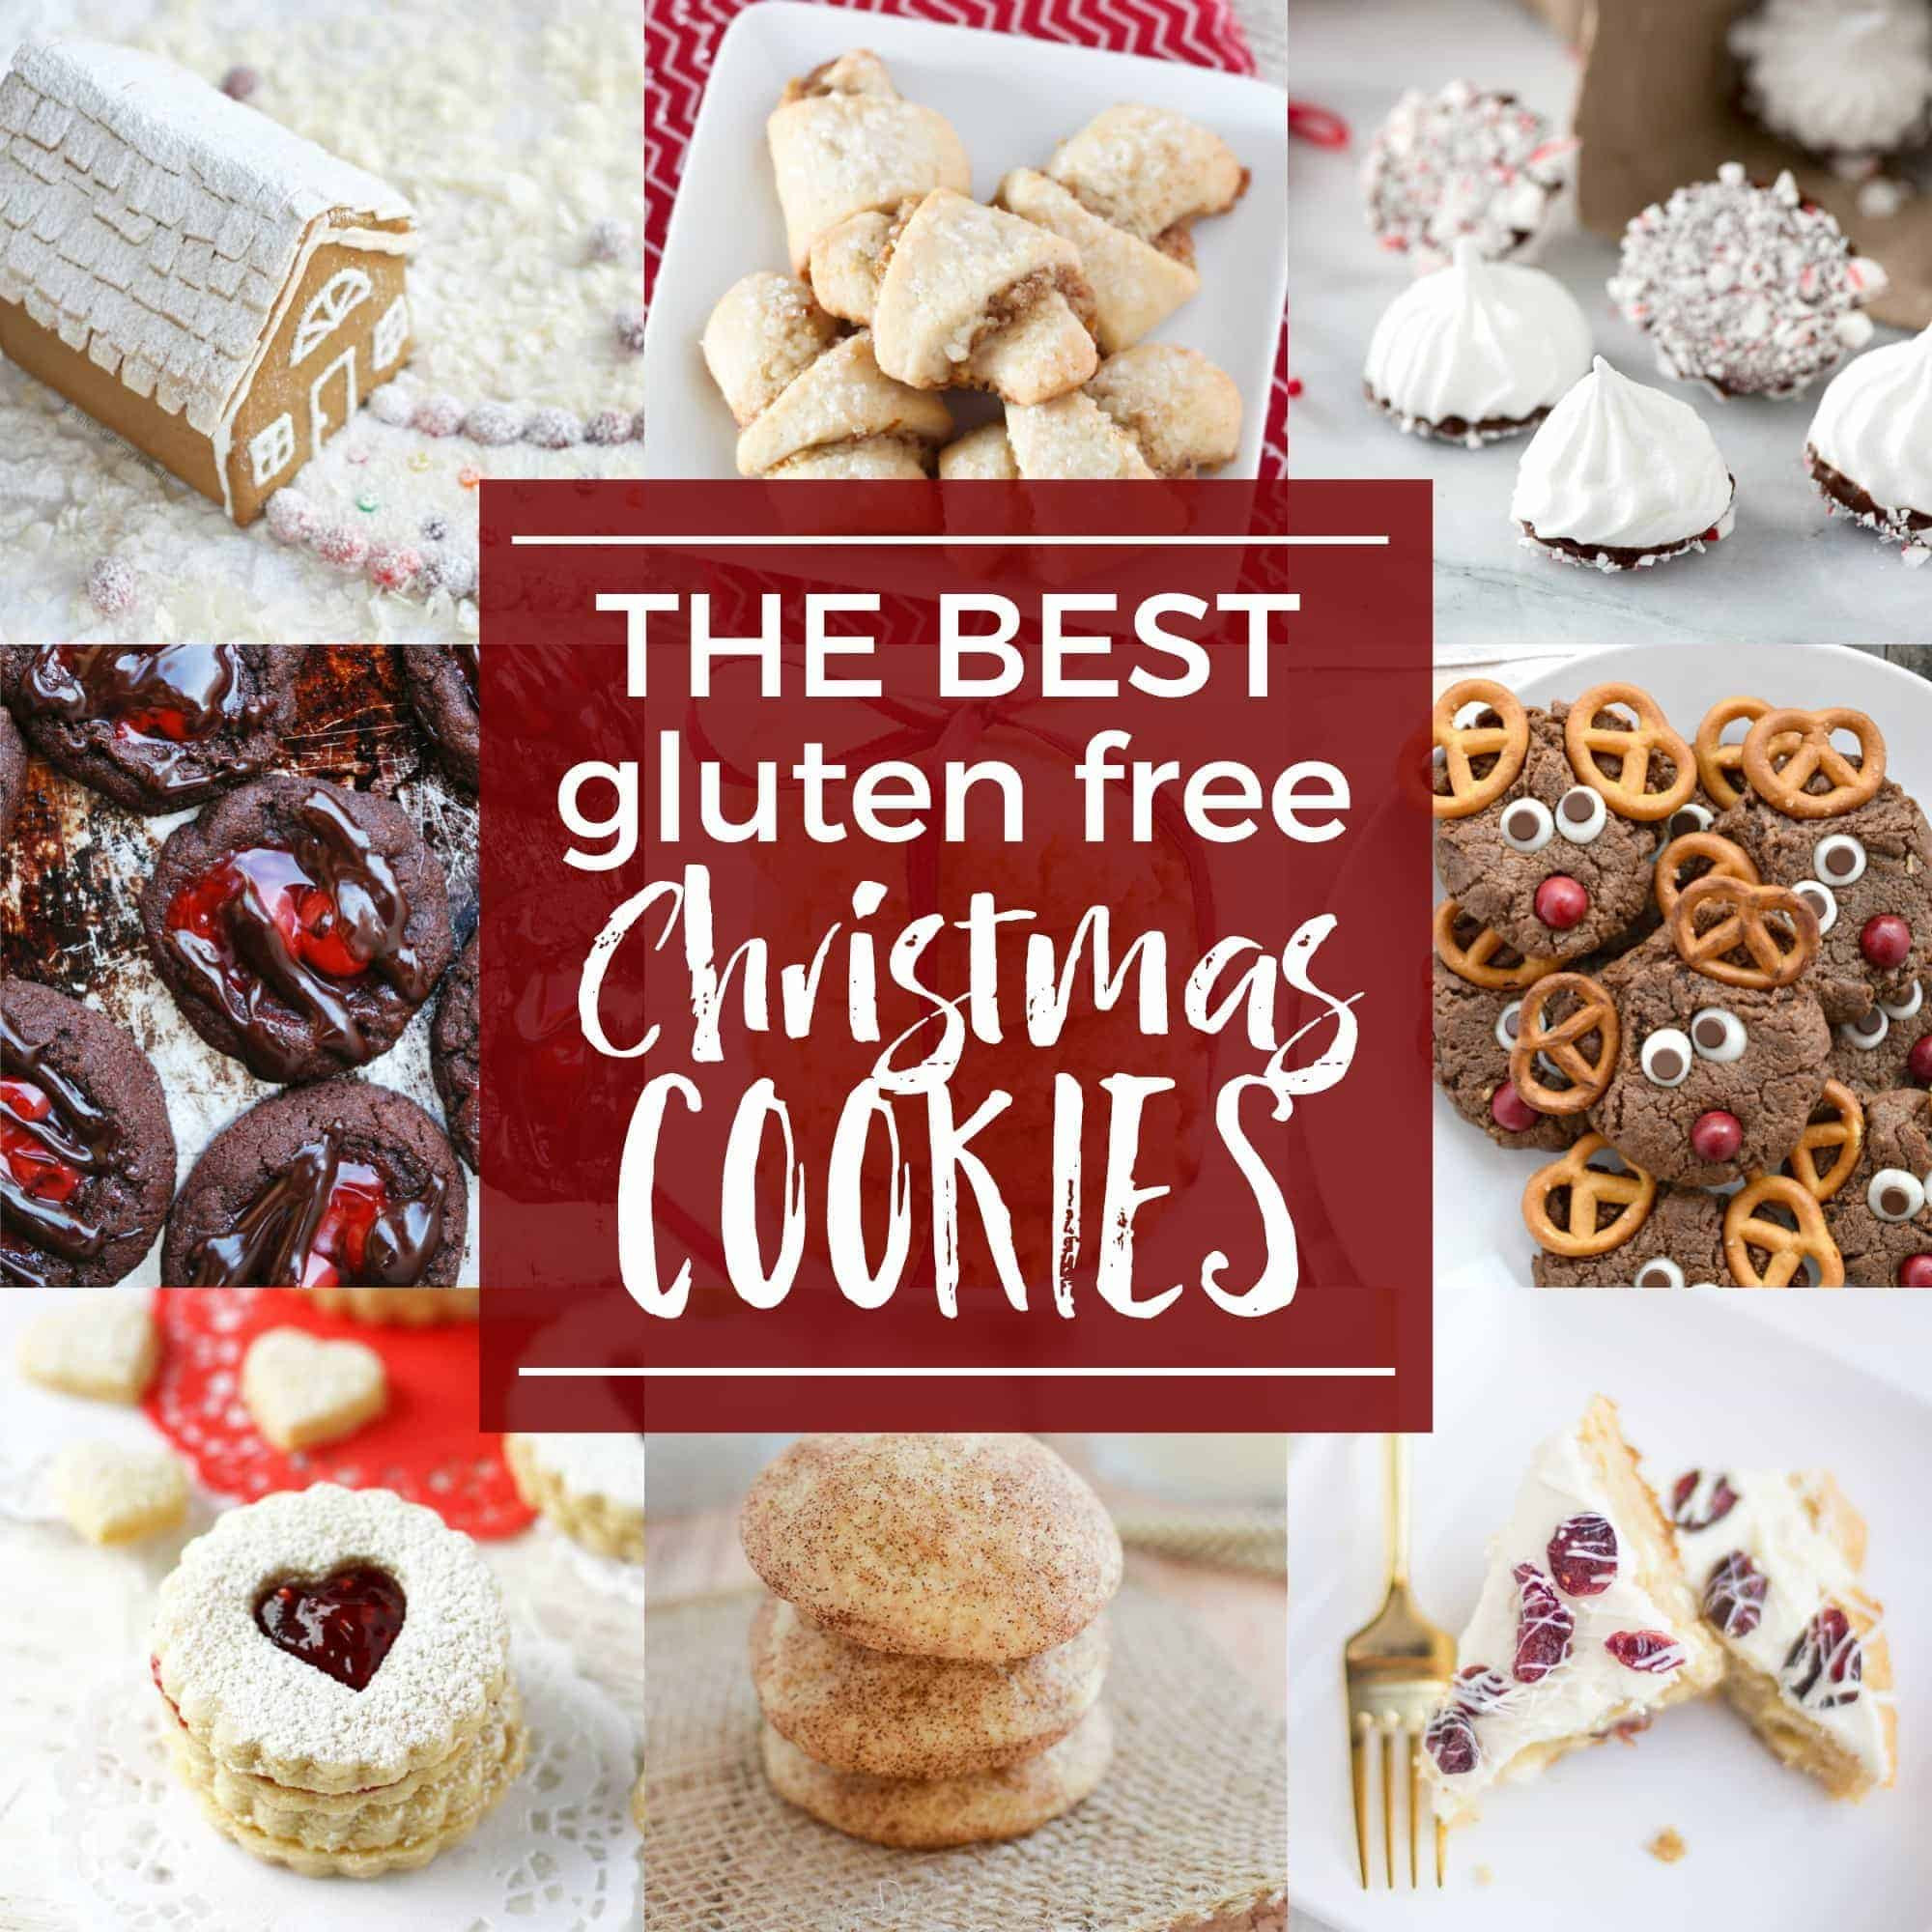 Gluten Free Holiday Cookie Recipes
 Gluten Free Christmas Cookies What the Fork